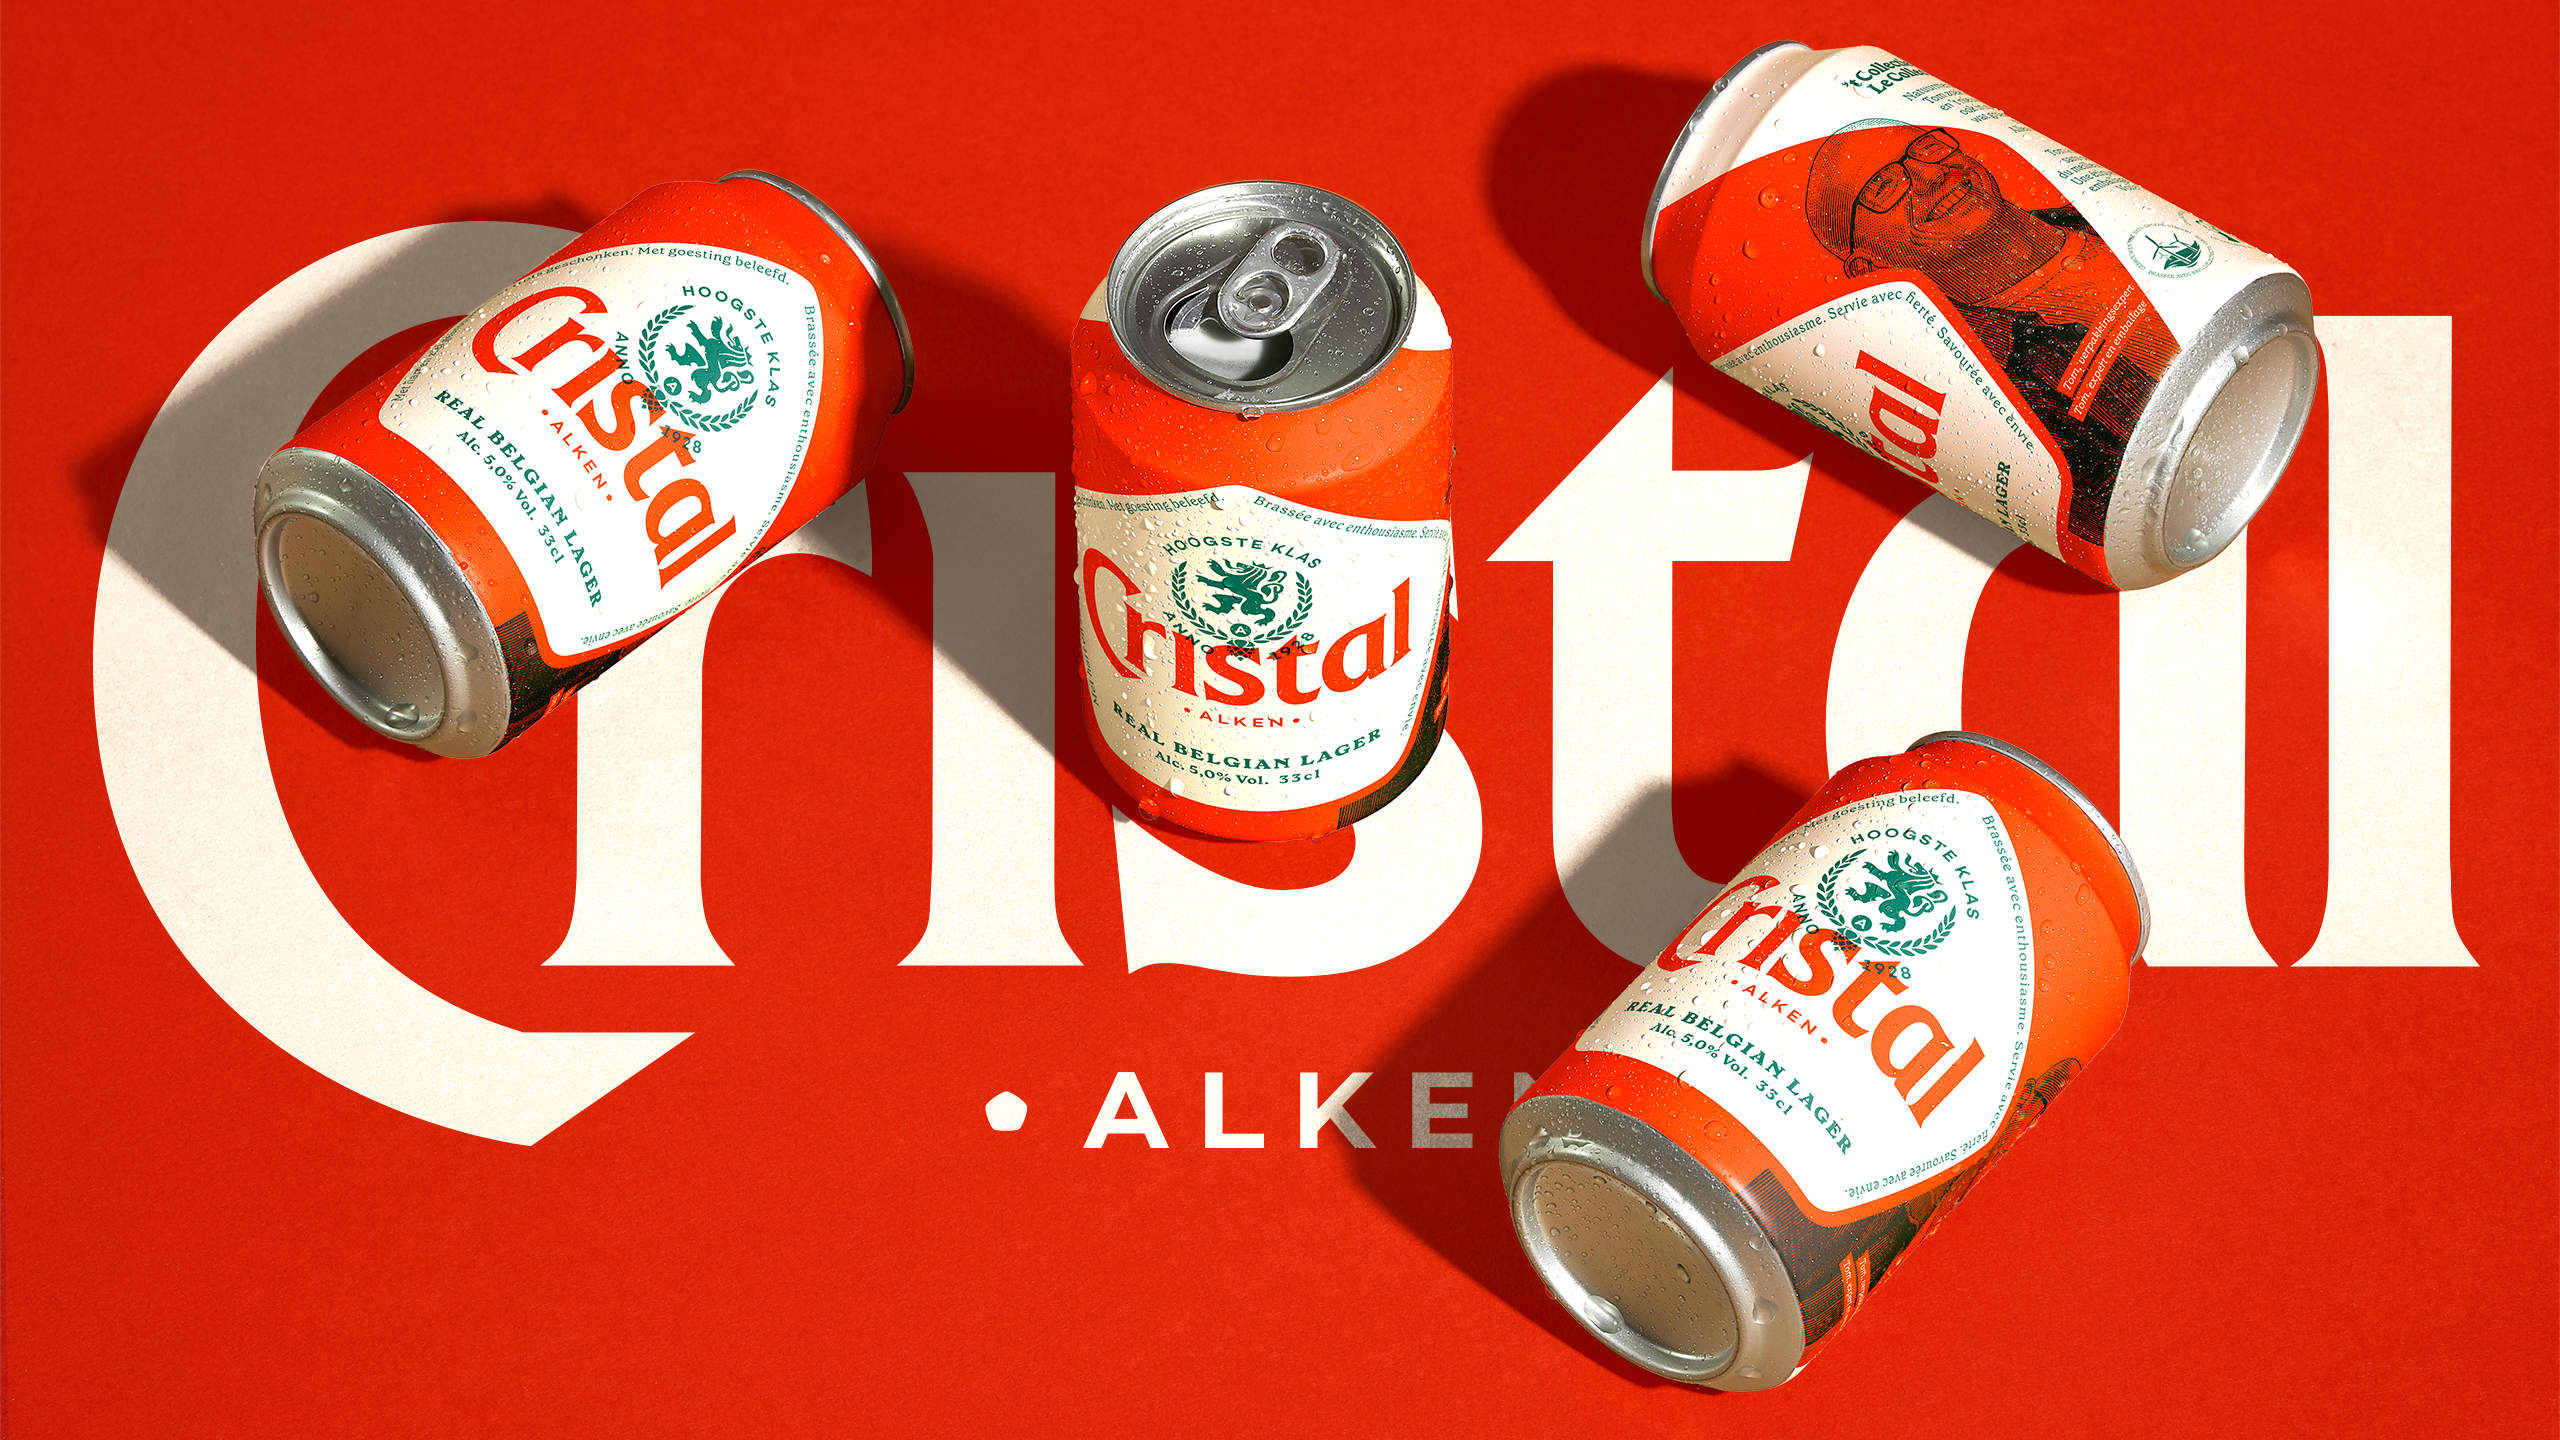 Cristal Belgian Lager Rebranding By WeWantMore Studio Balances The Brand's  Rich History With Contemporary Design